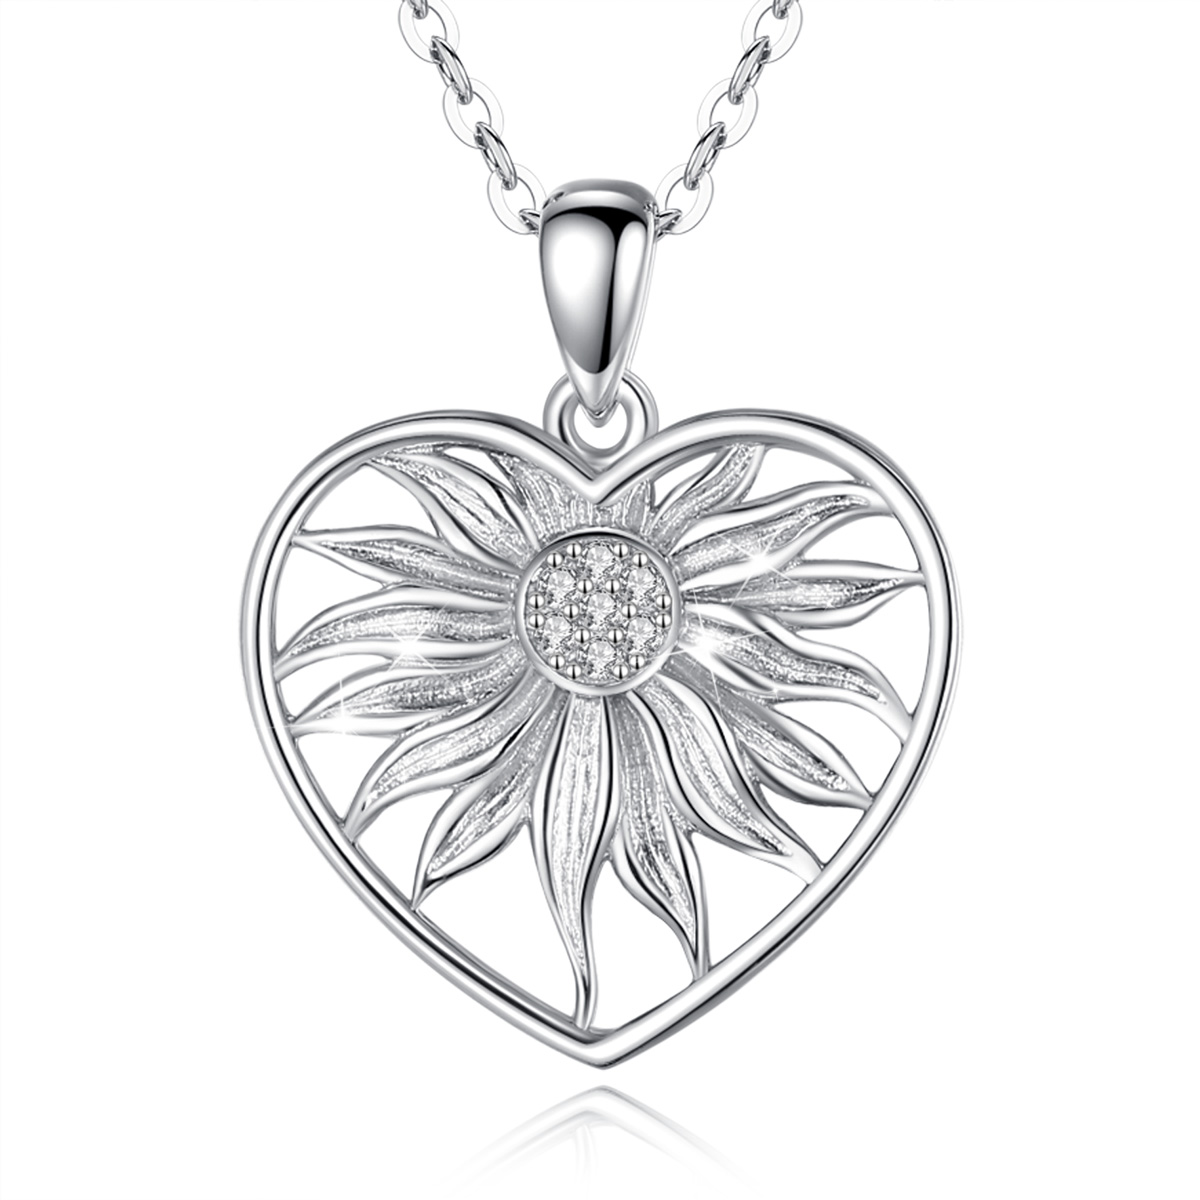 Merryshine Jewelry 925 Sterling Silver Large Trending Flowers Sun Flower Necklace Pendant For Women Gift